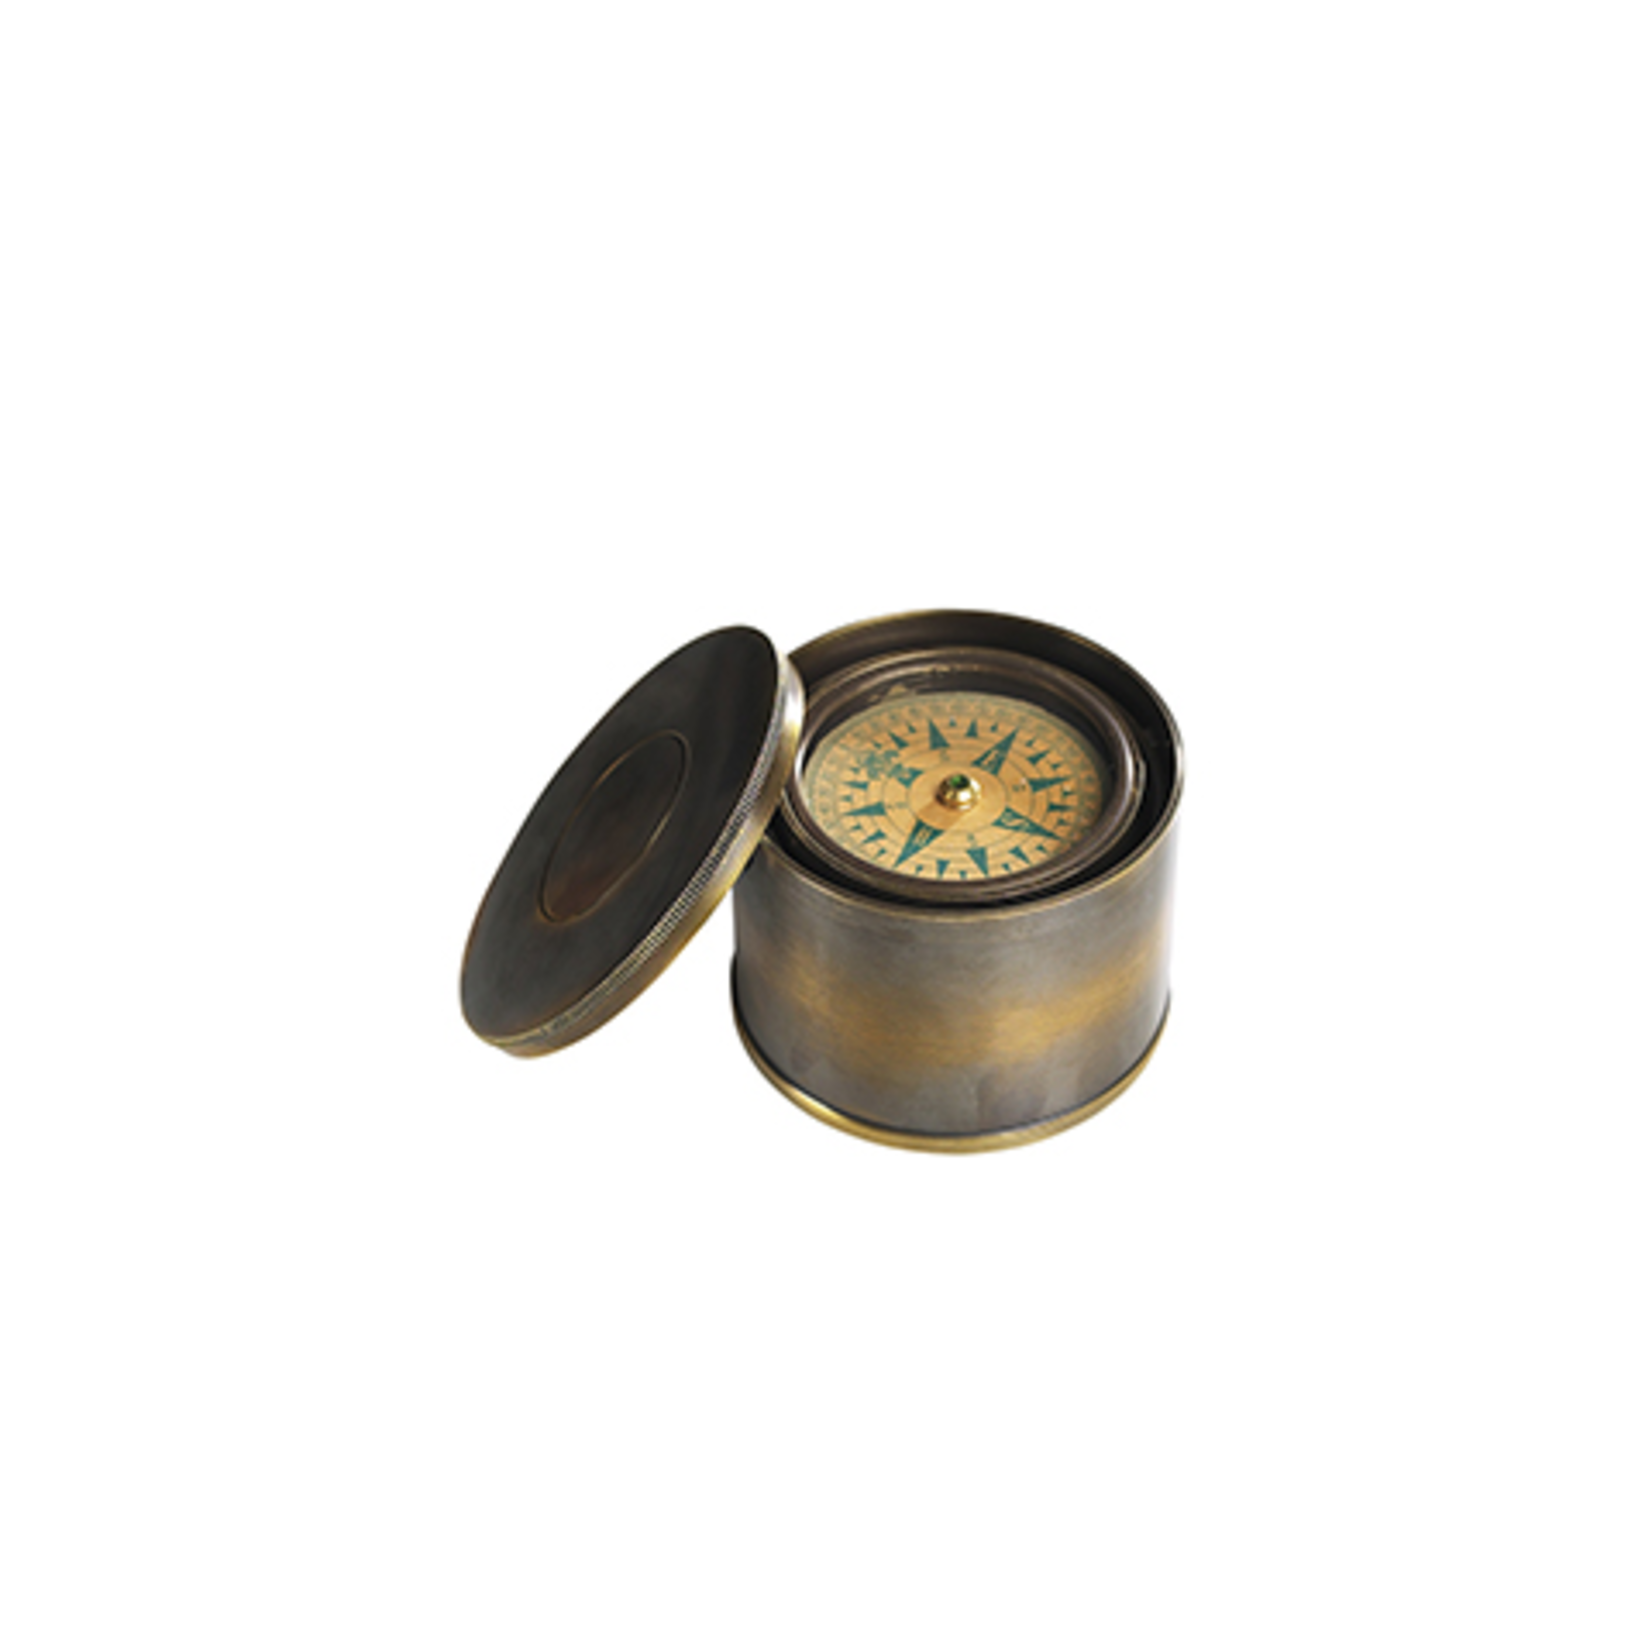 AUTHENTIC MODELS 19TH C POCKET COMPASS